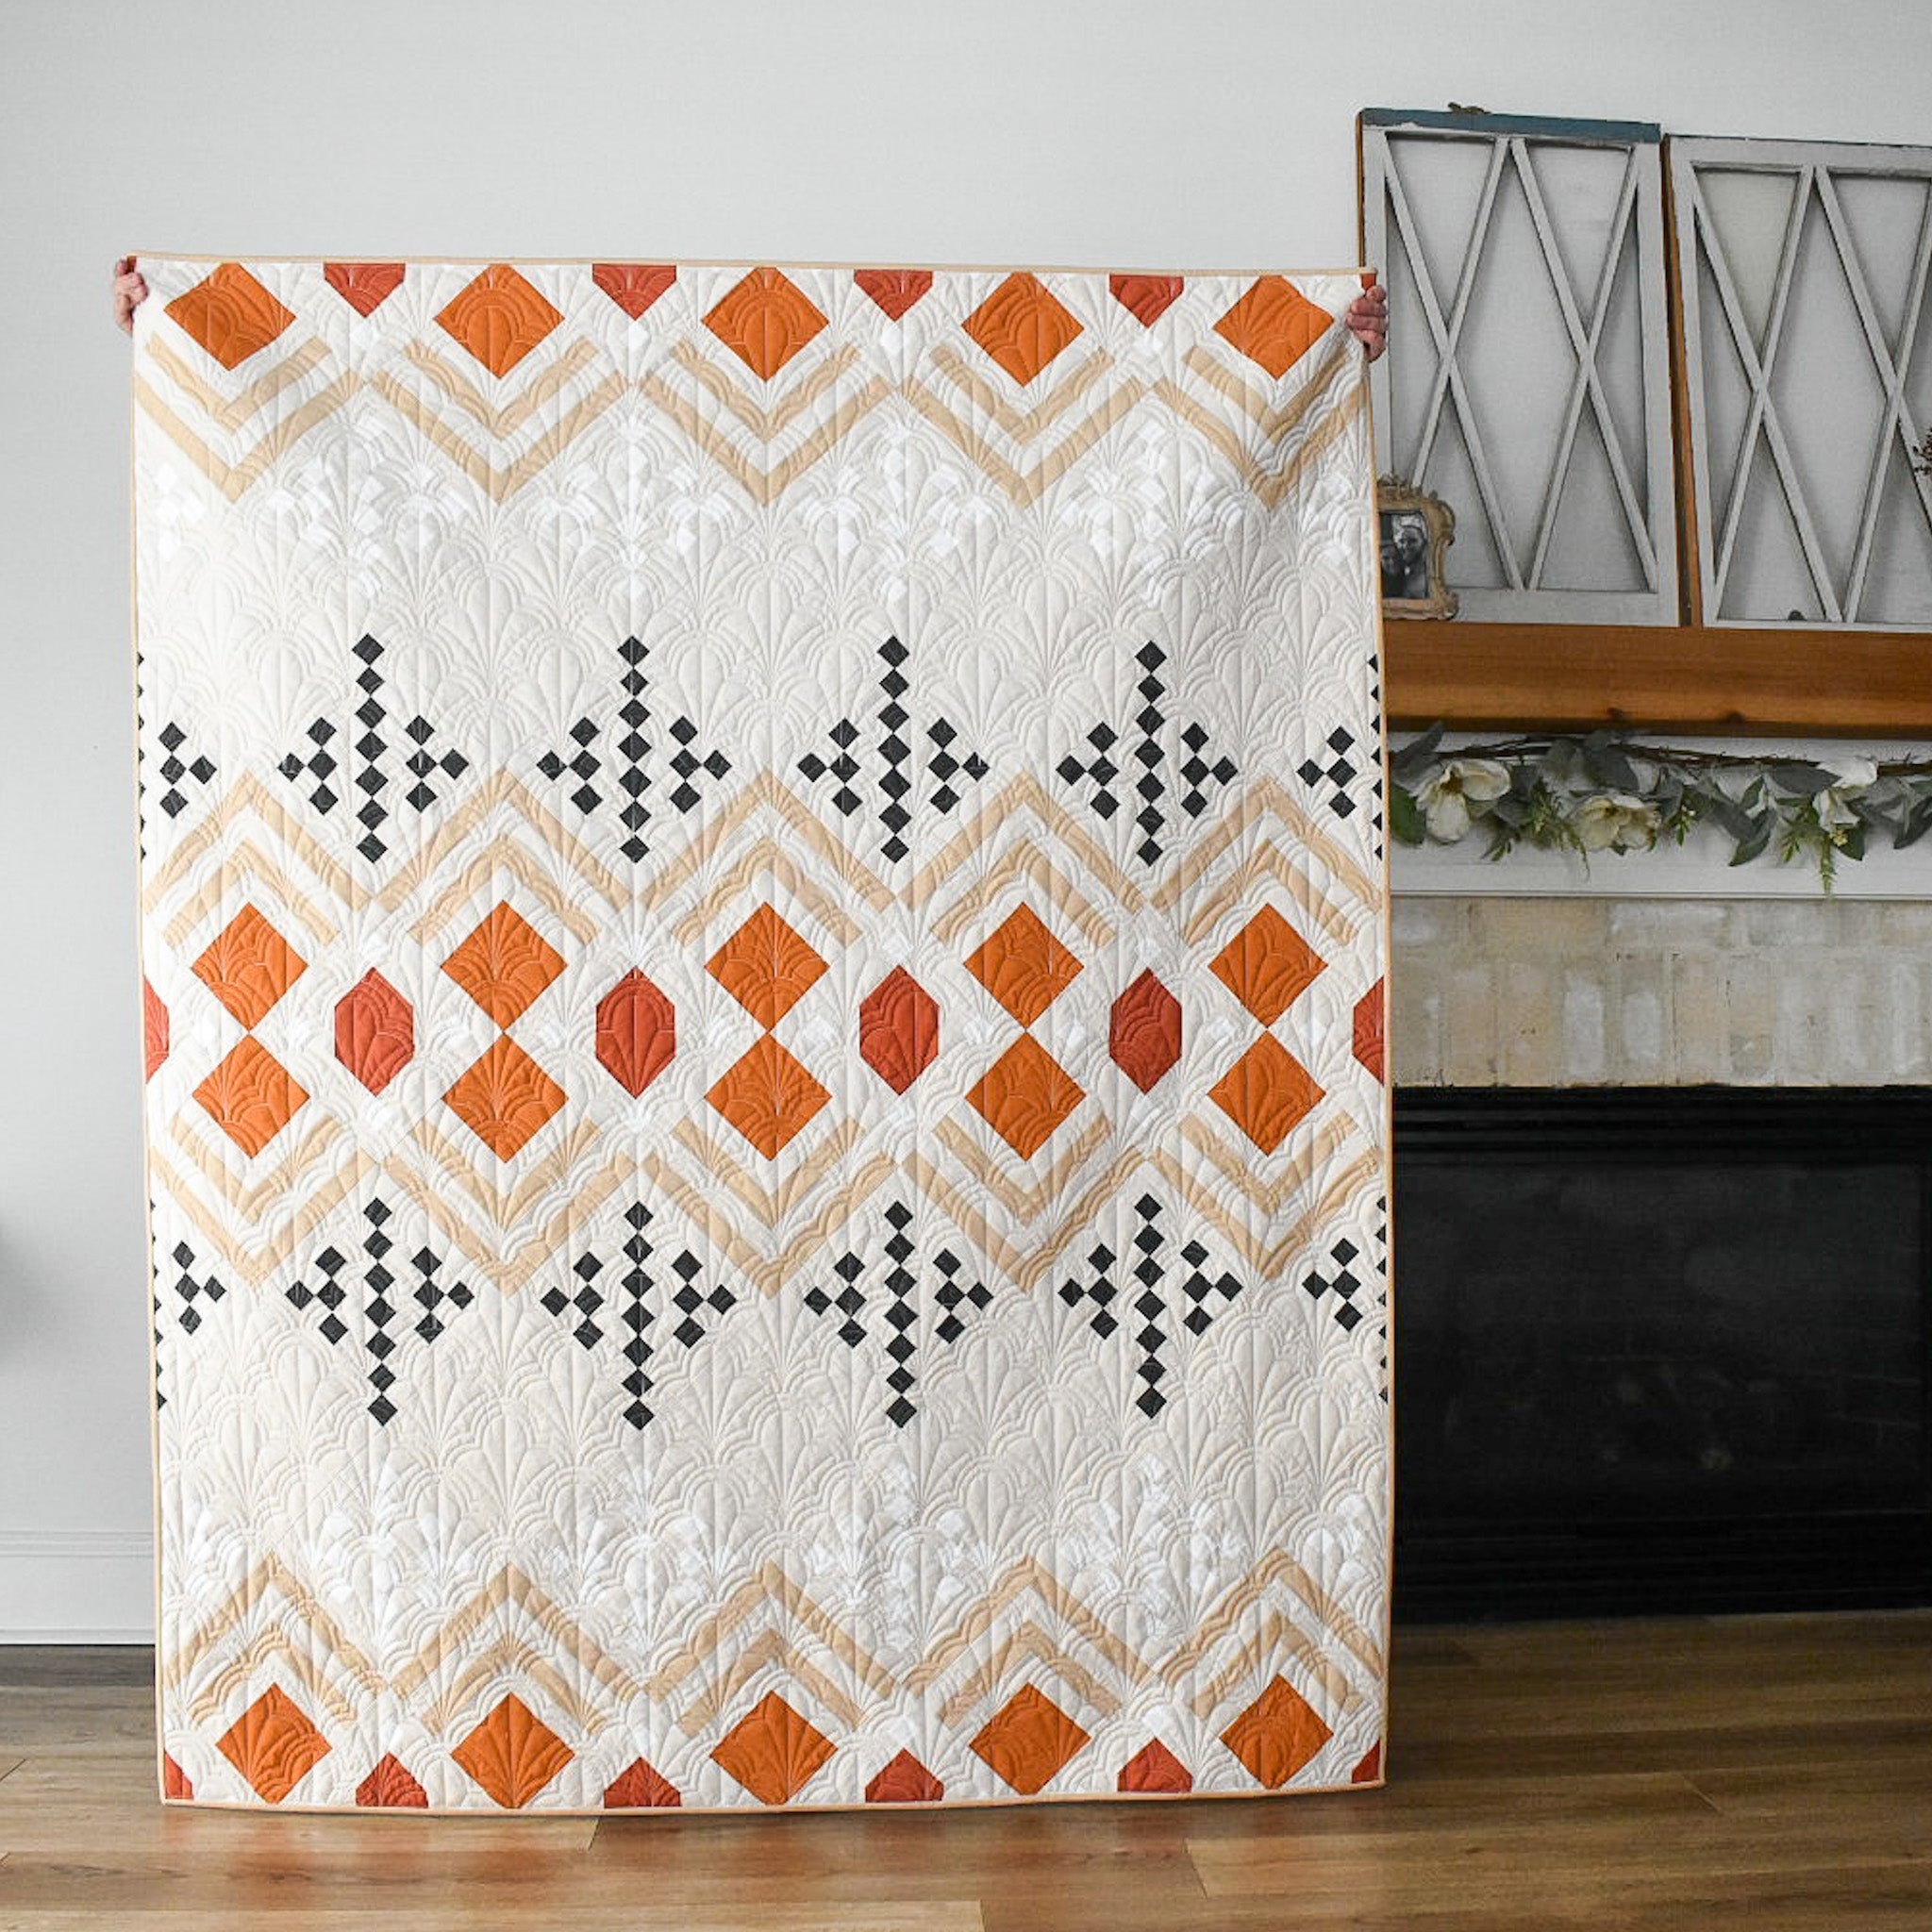 Deco Quilt - the Ivory version